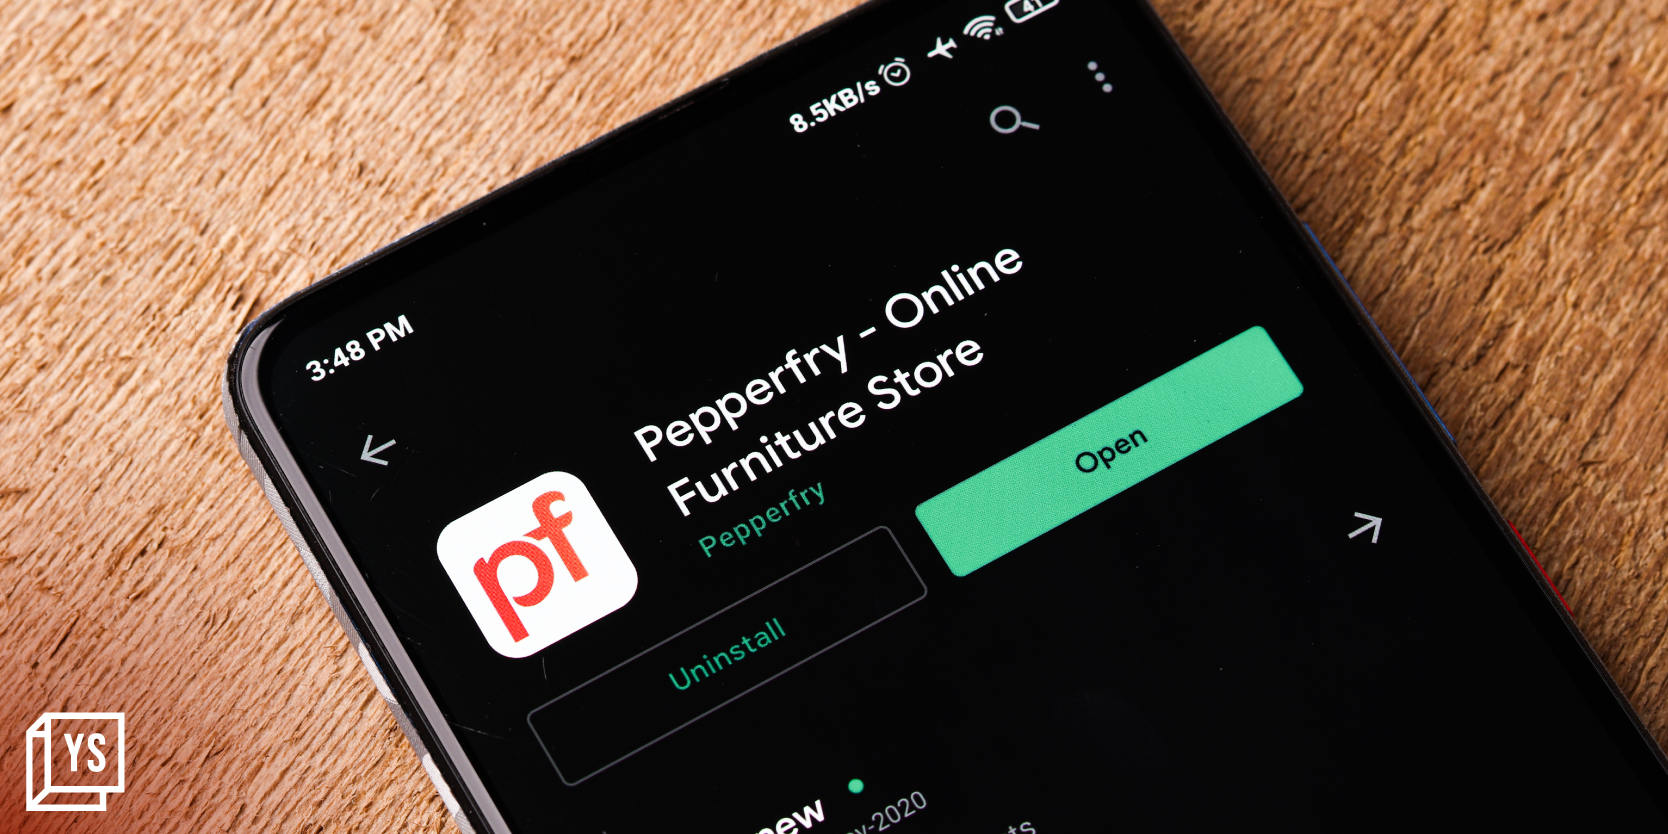 Bertelsmann-backed Pepperfry’s FY23 revenue up 10% YoY as it doubles down on retail expansion